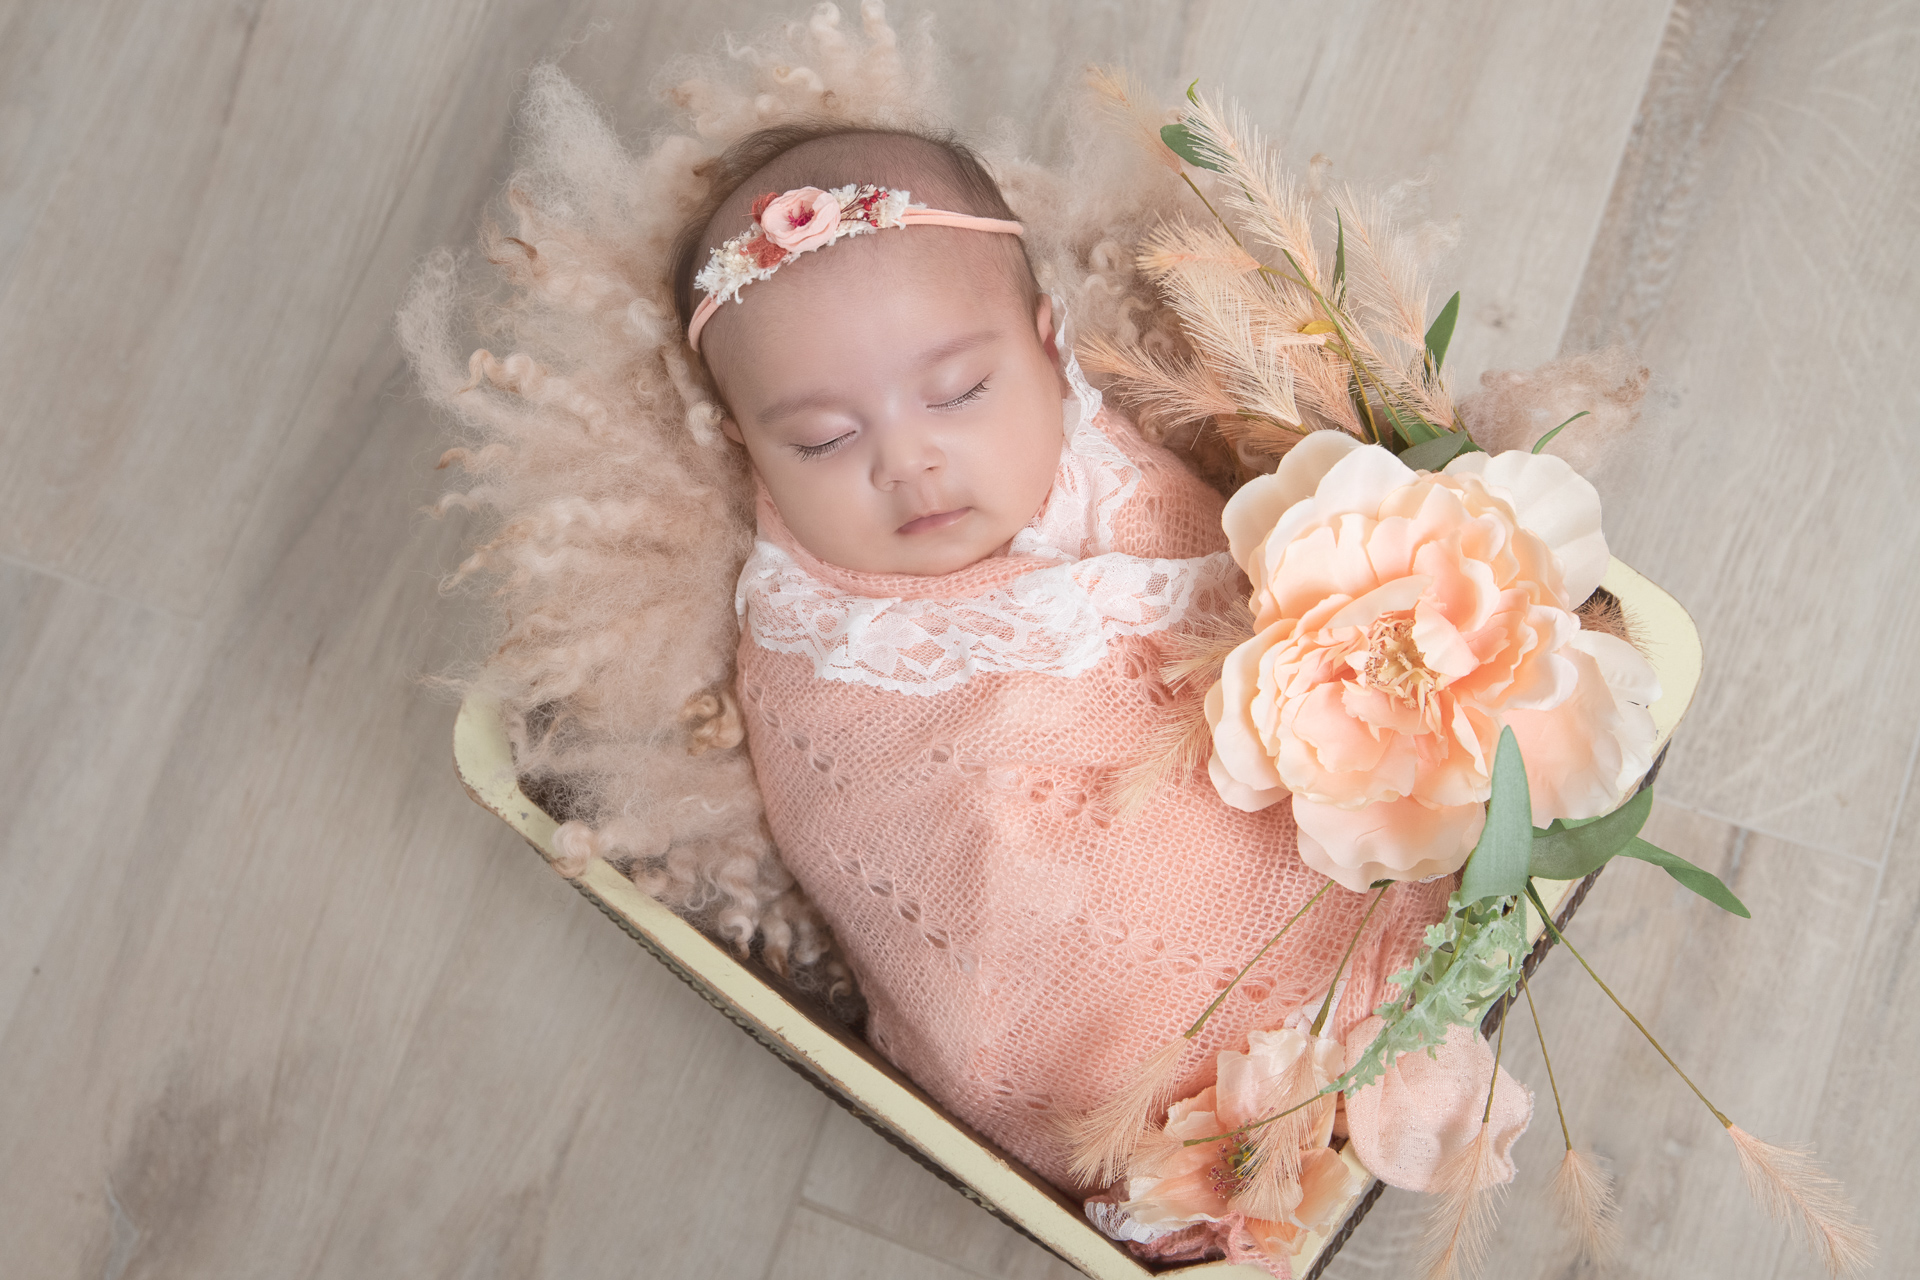 Newborn on pink headband and wrap rests on square shaped prop. Flowers and fluffy carpet decorates the scene.